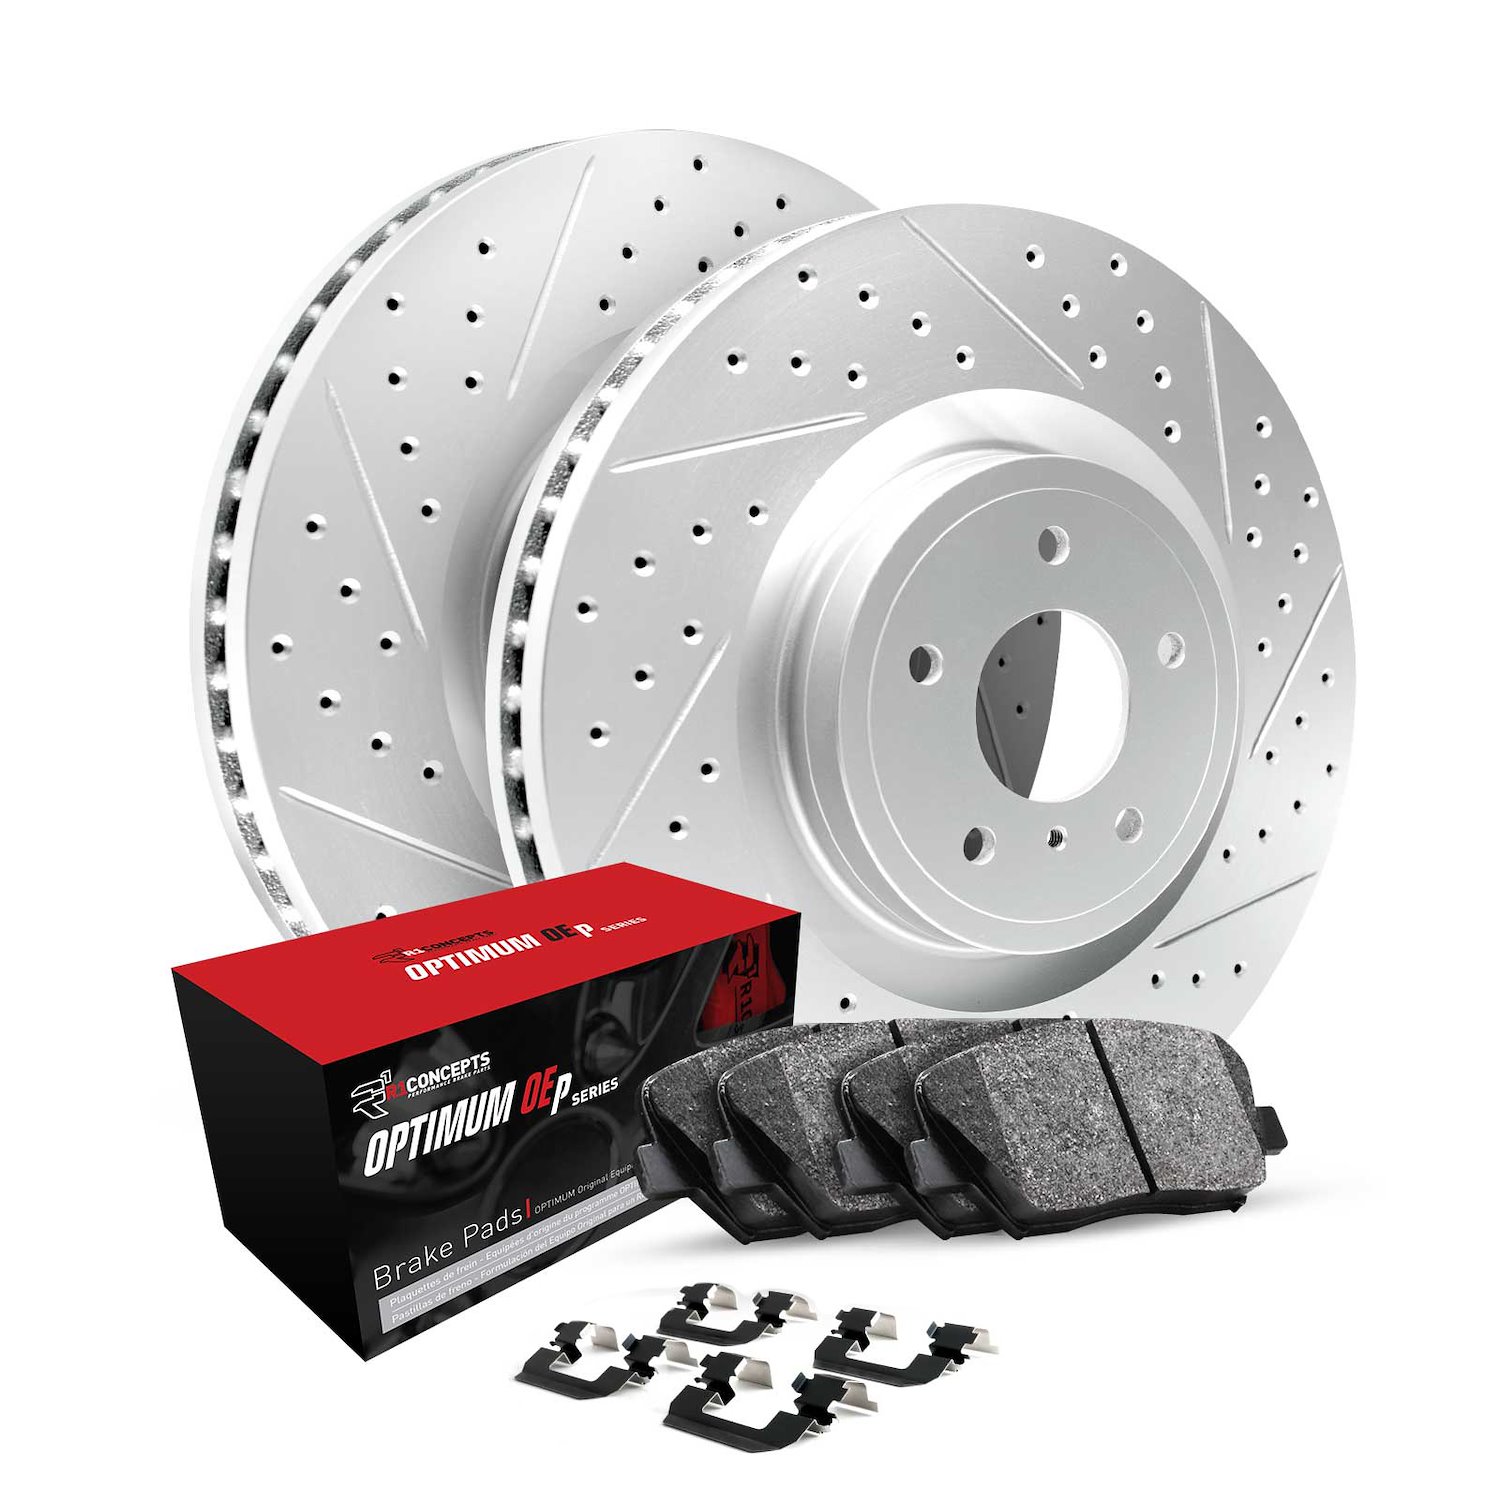 GEO-Carbon Drilled & Slotted Brake Rotor Set w/Optimum OE Pads & Hardware, Fits Select Fits Multiple Makes/Models